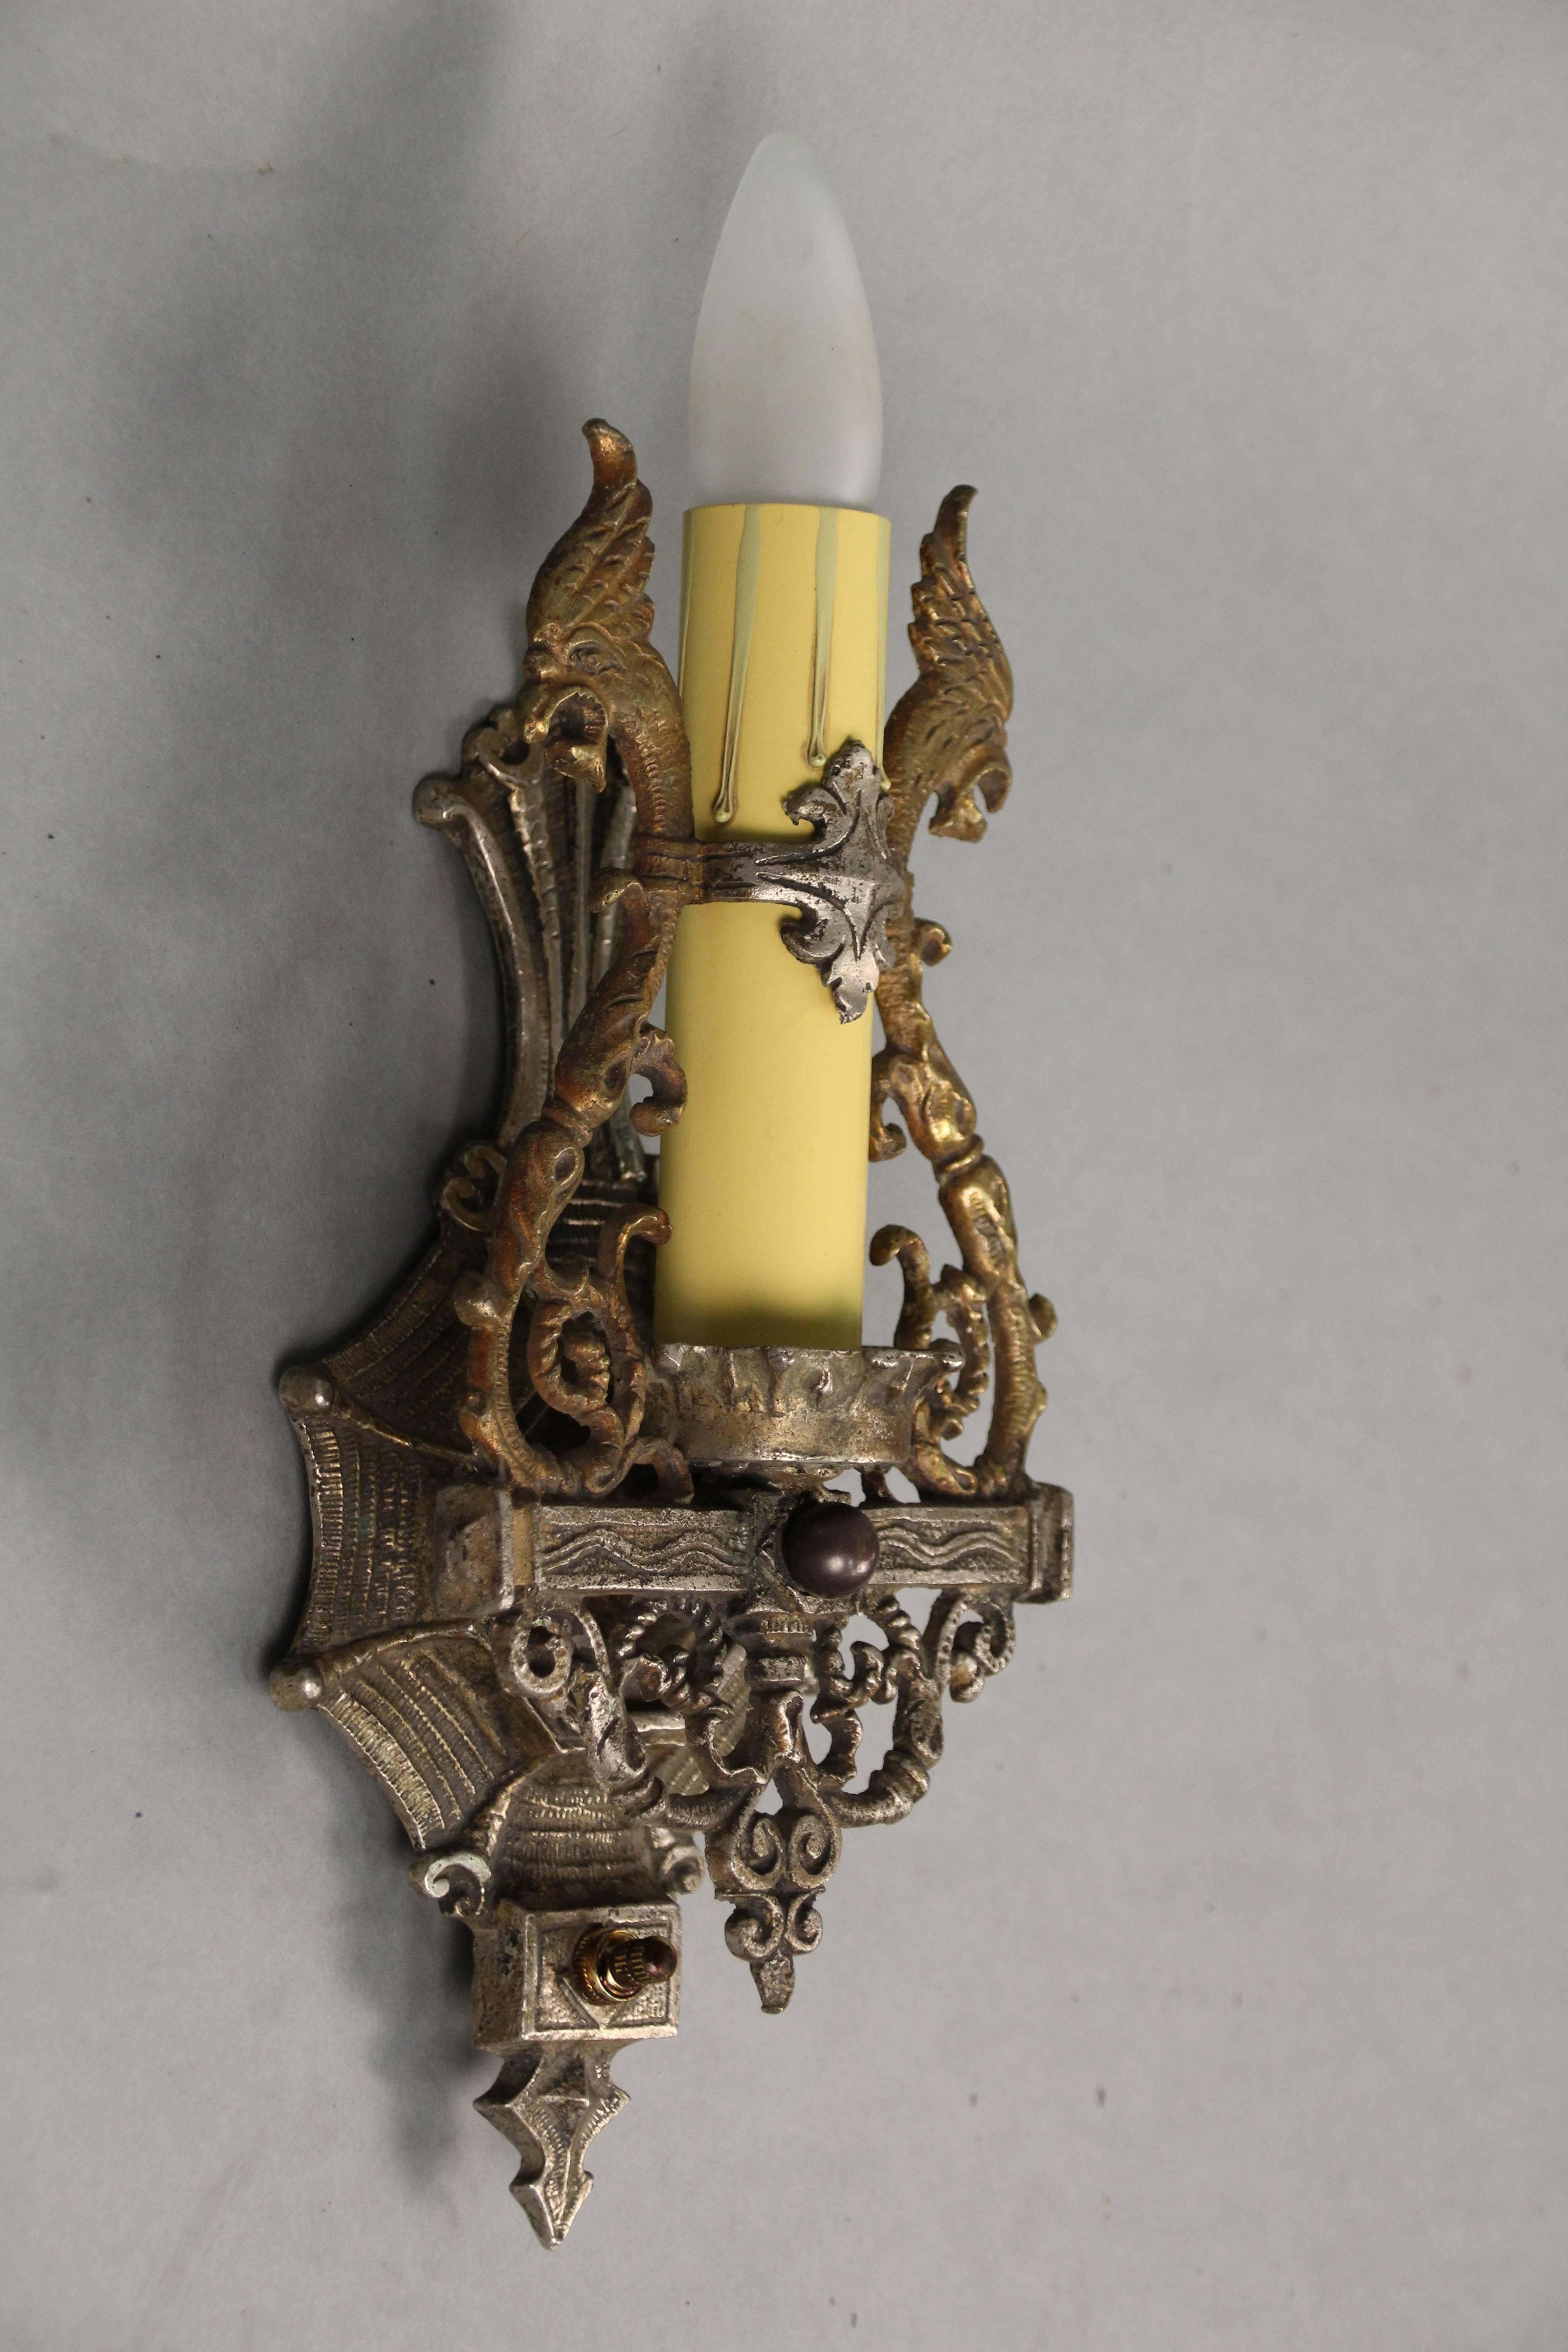 Two-toned single sconce with original finish. Would fit nicely in Spanish Revival or English Tudor home.